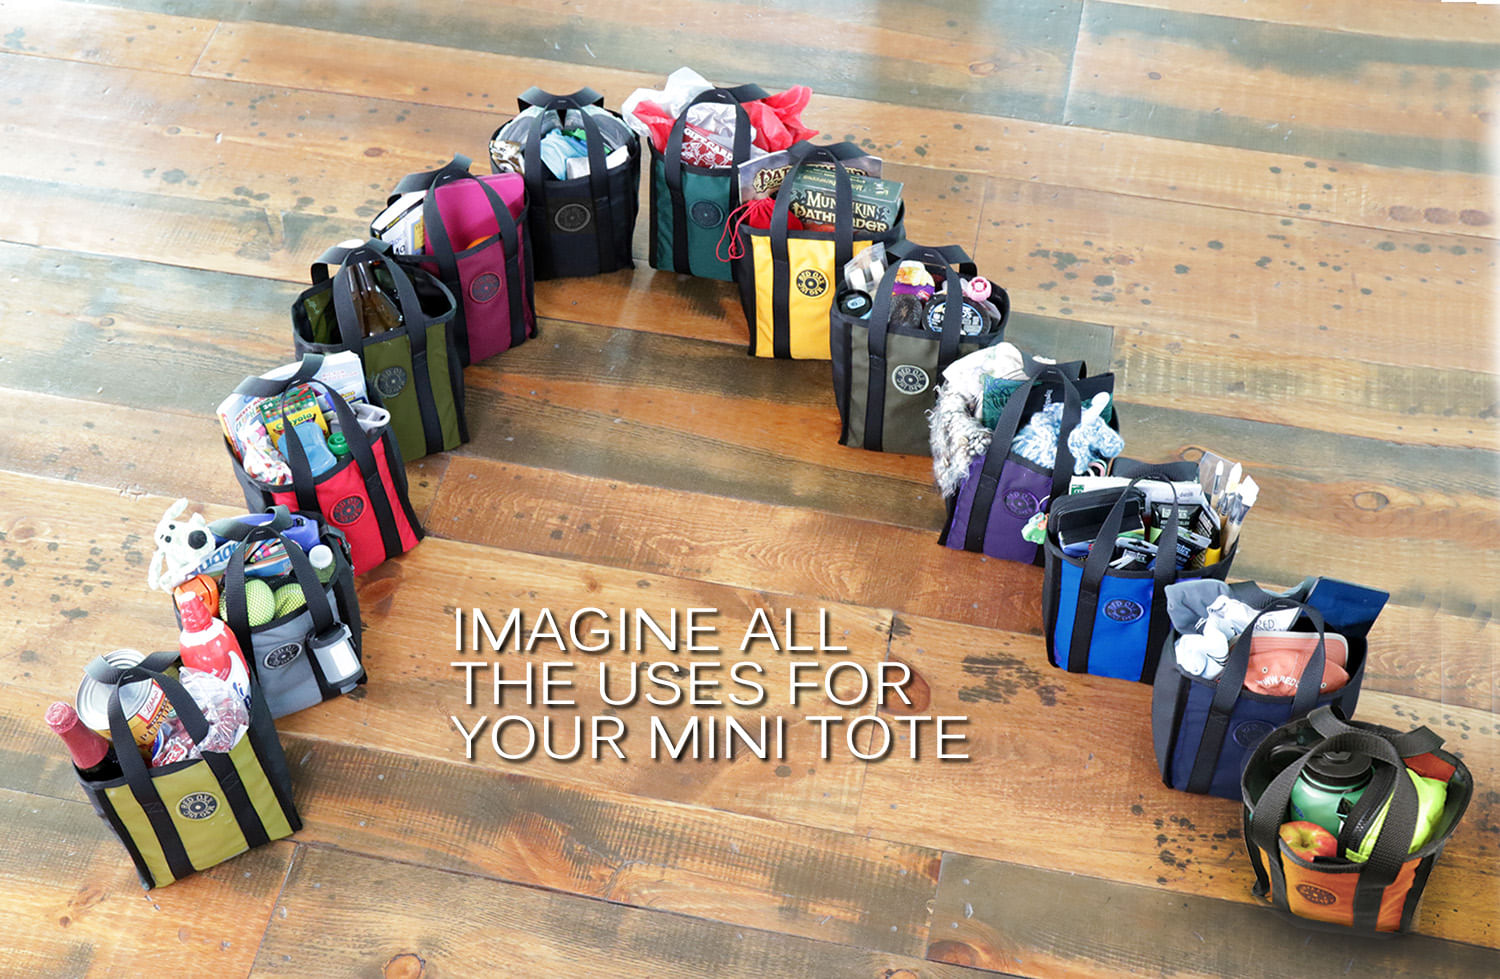 Imagine all the uses for your mini tote.